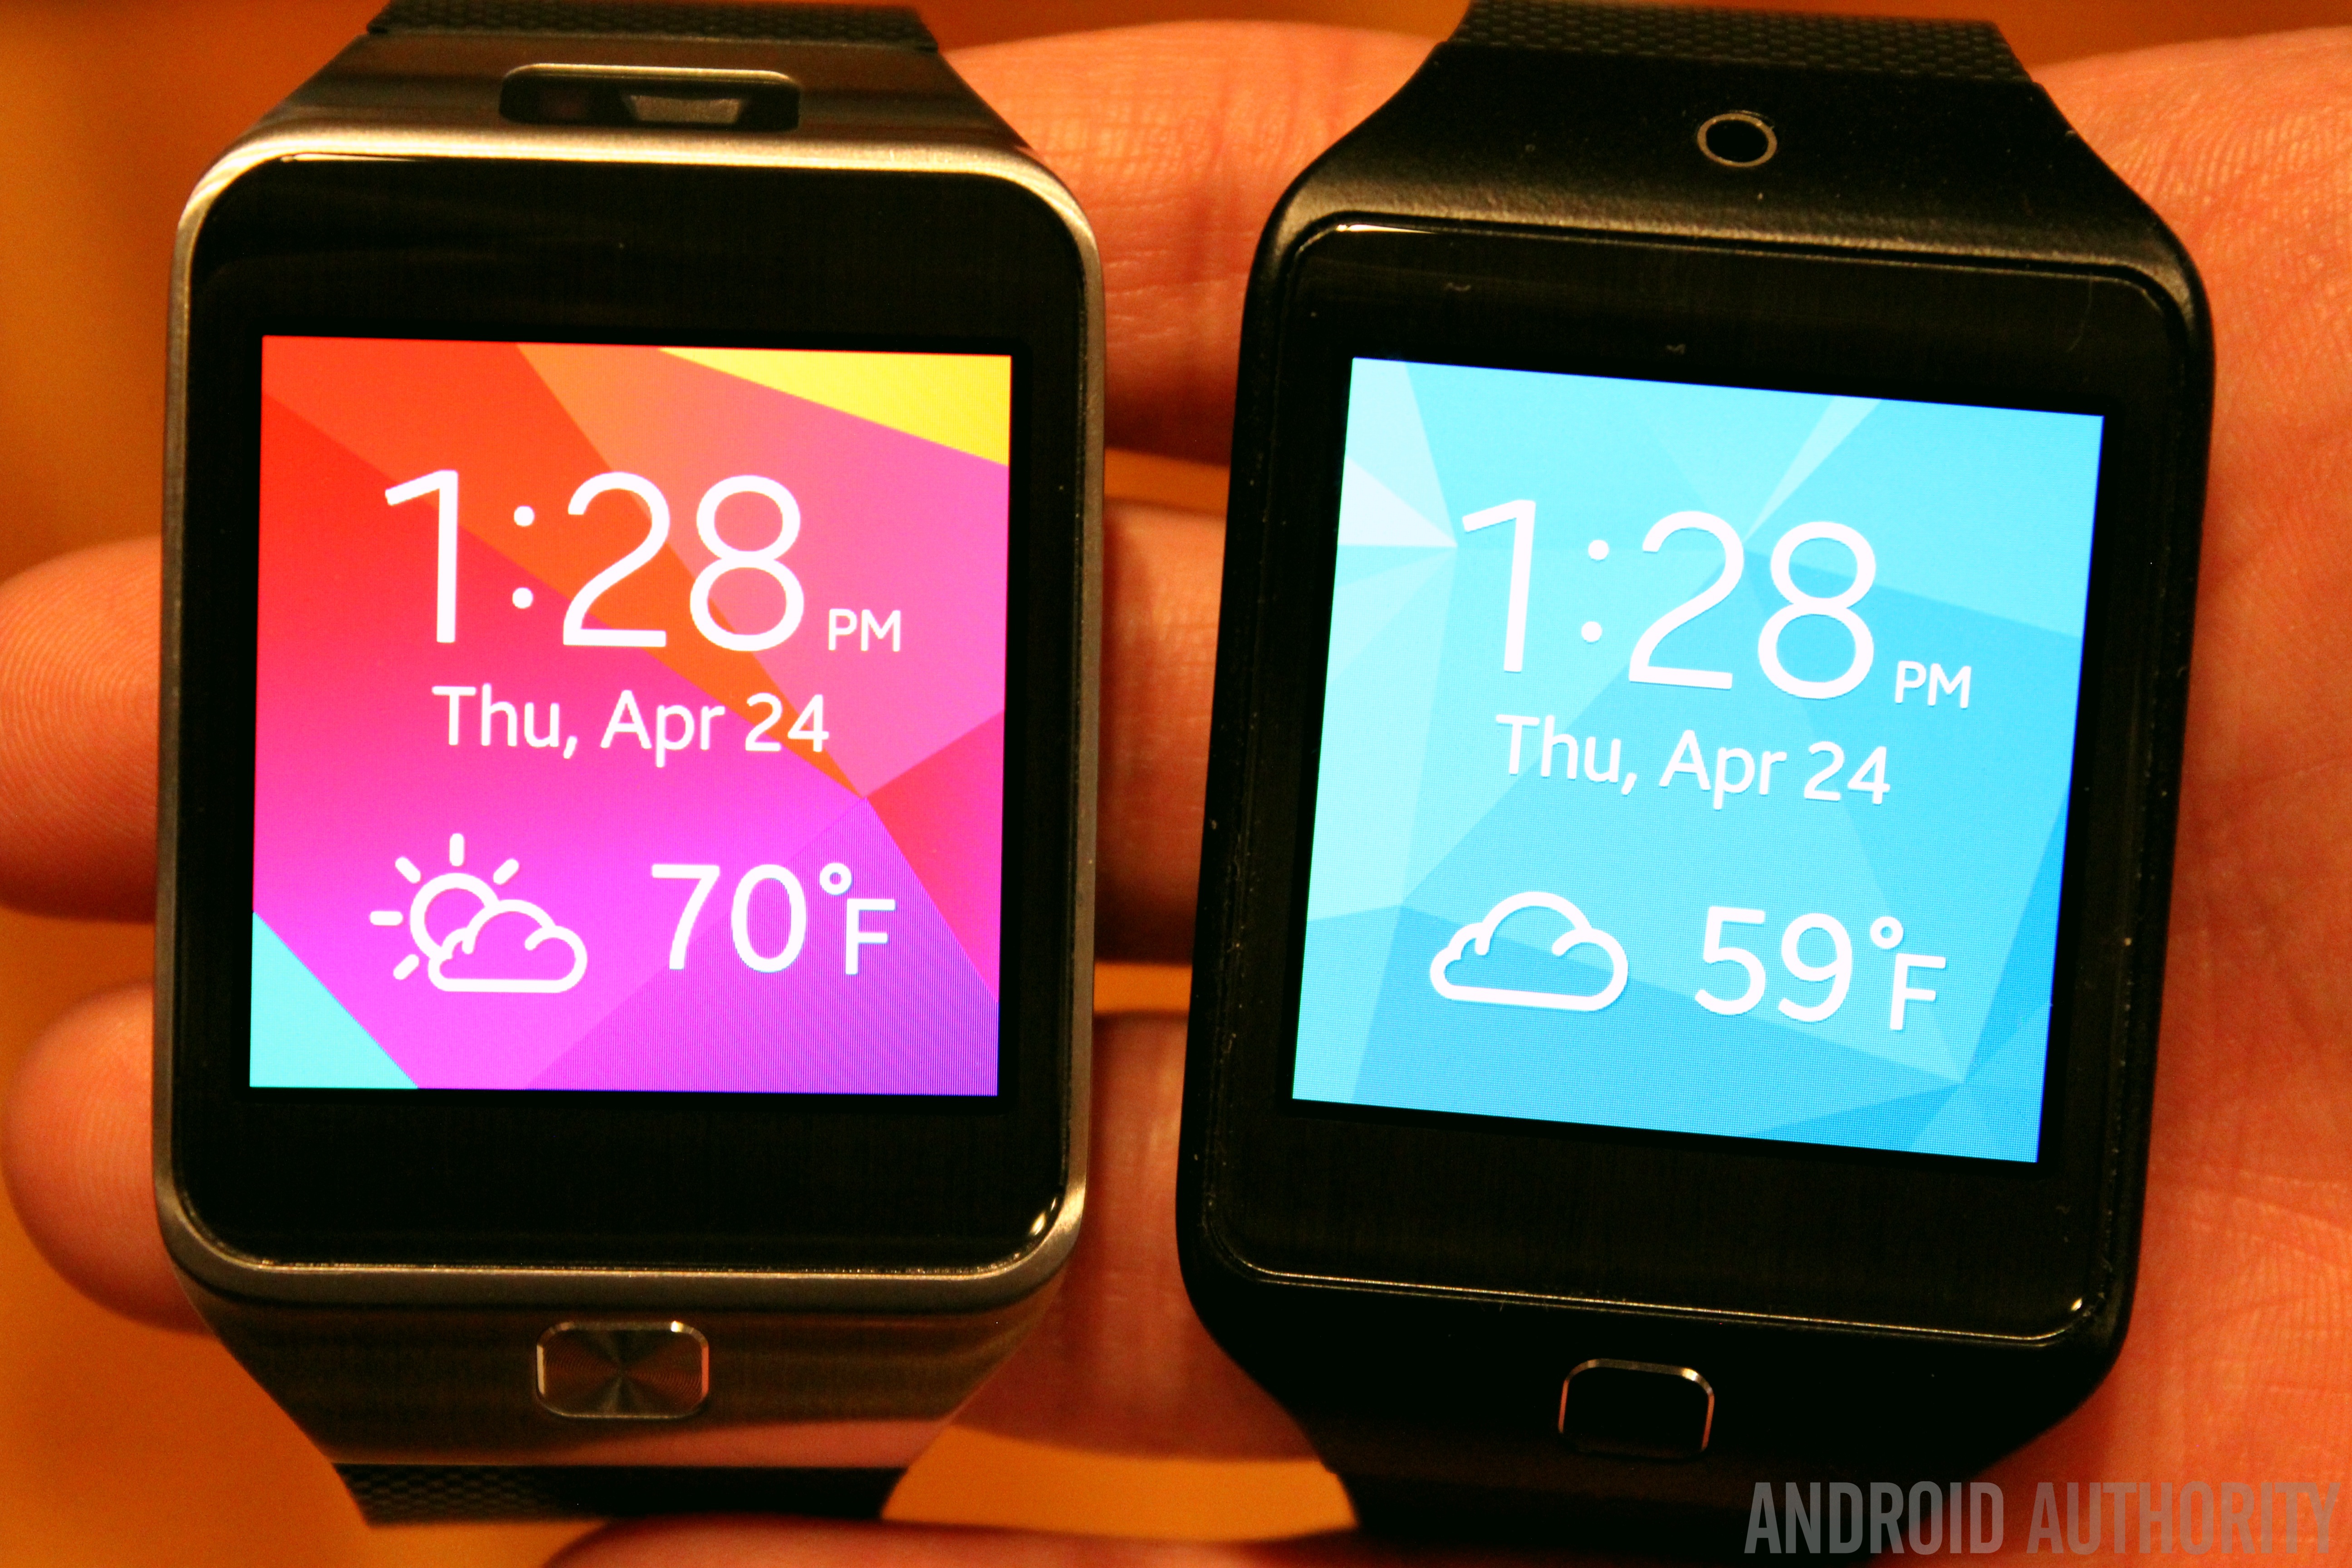 The Gear 2 (left) comes with a metal construction, while the Gear 2 Neo (right) is made of plastic.